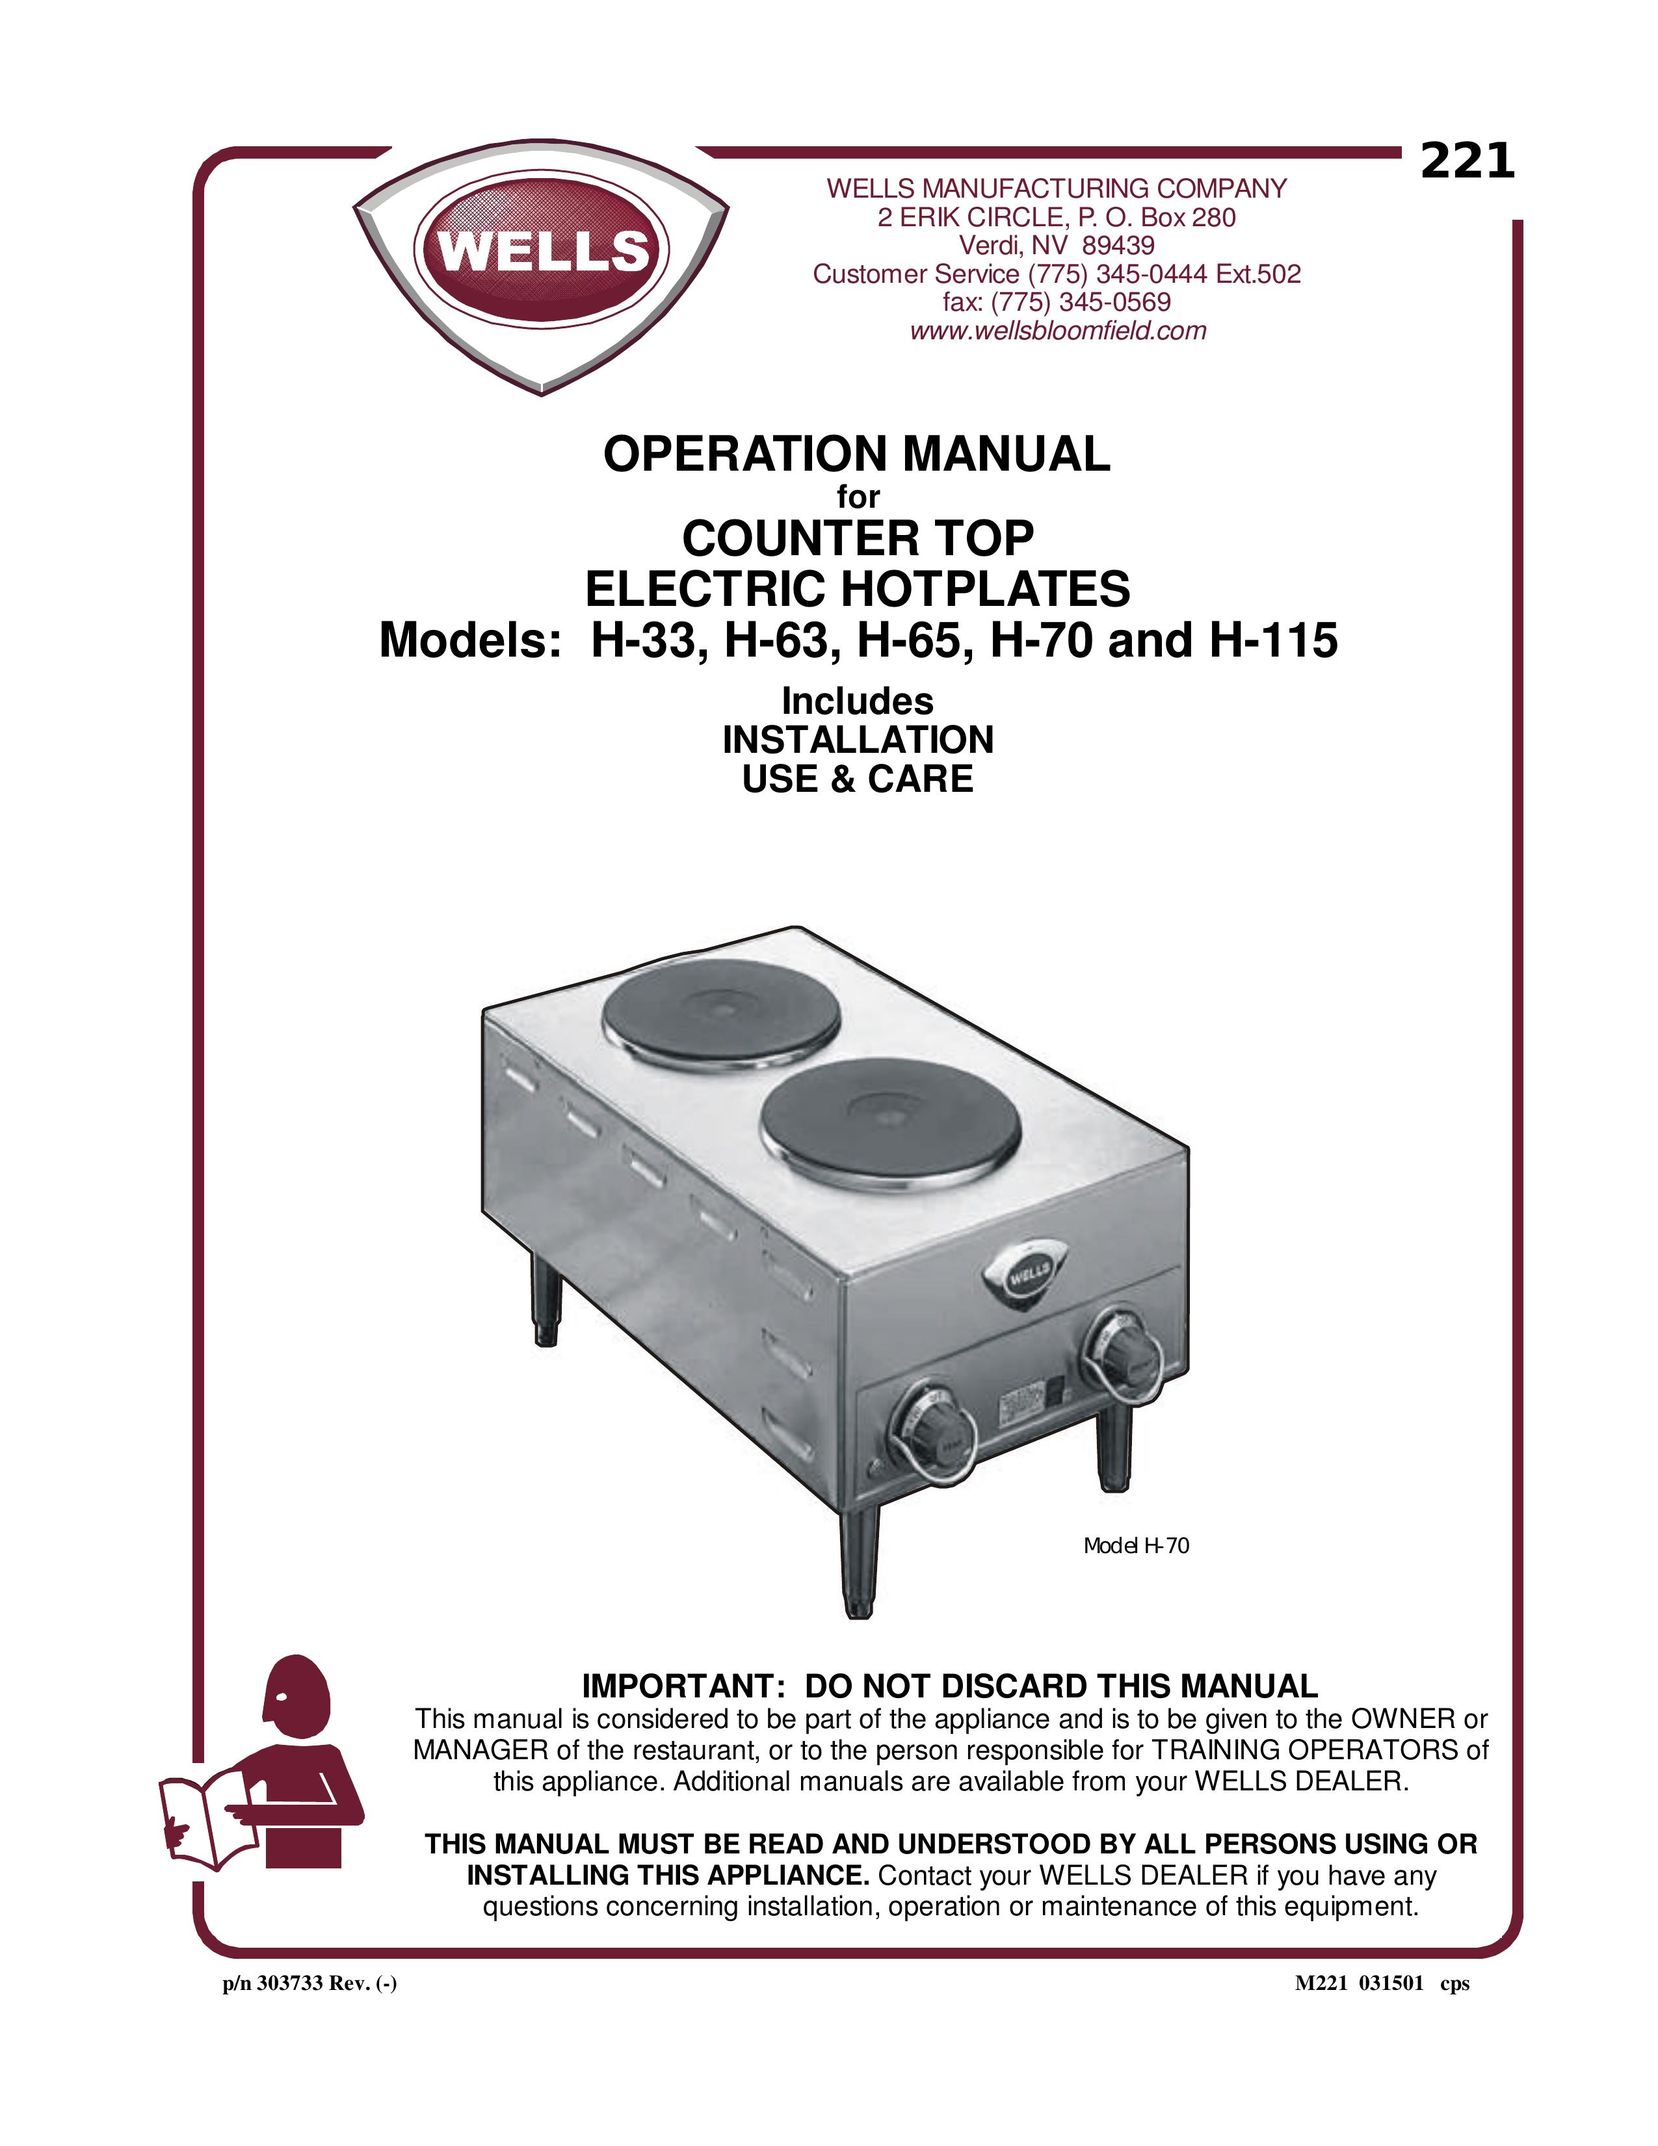 Wells H-115 Oven User Manual